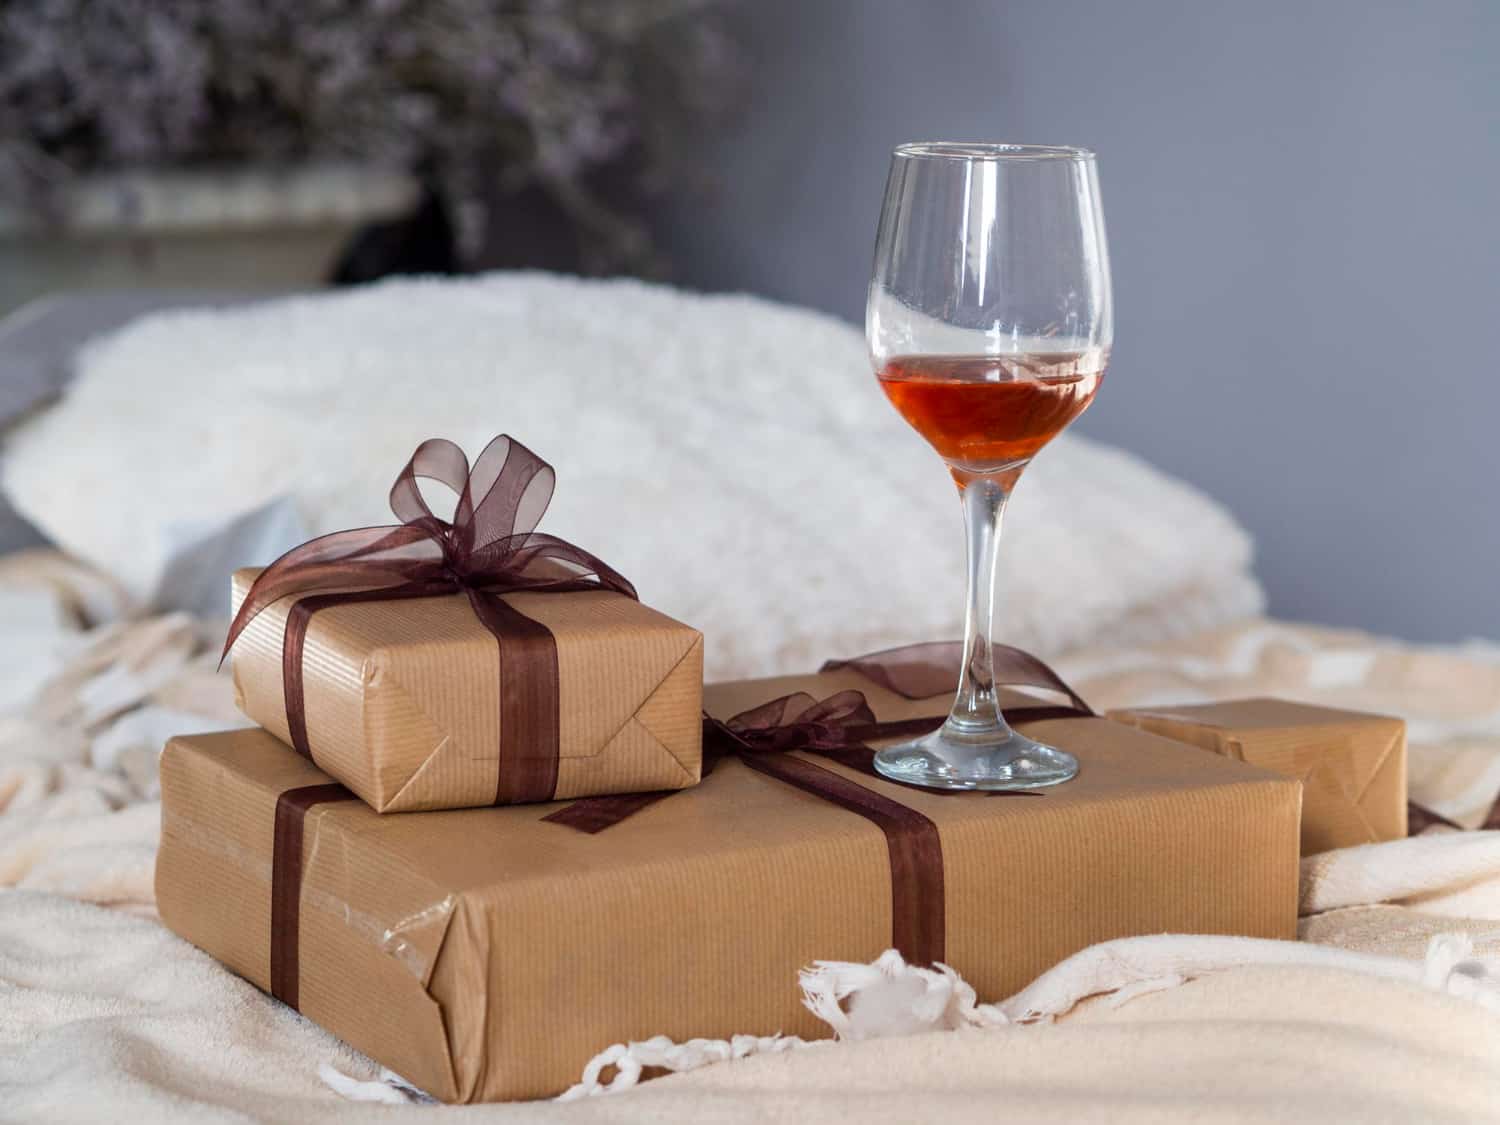 Best gifts for wine lovers 2023, from subscriptions to wine